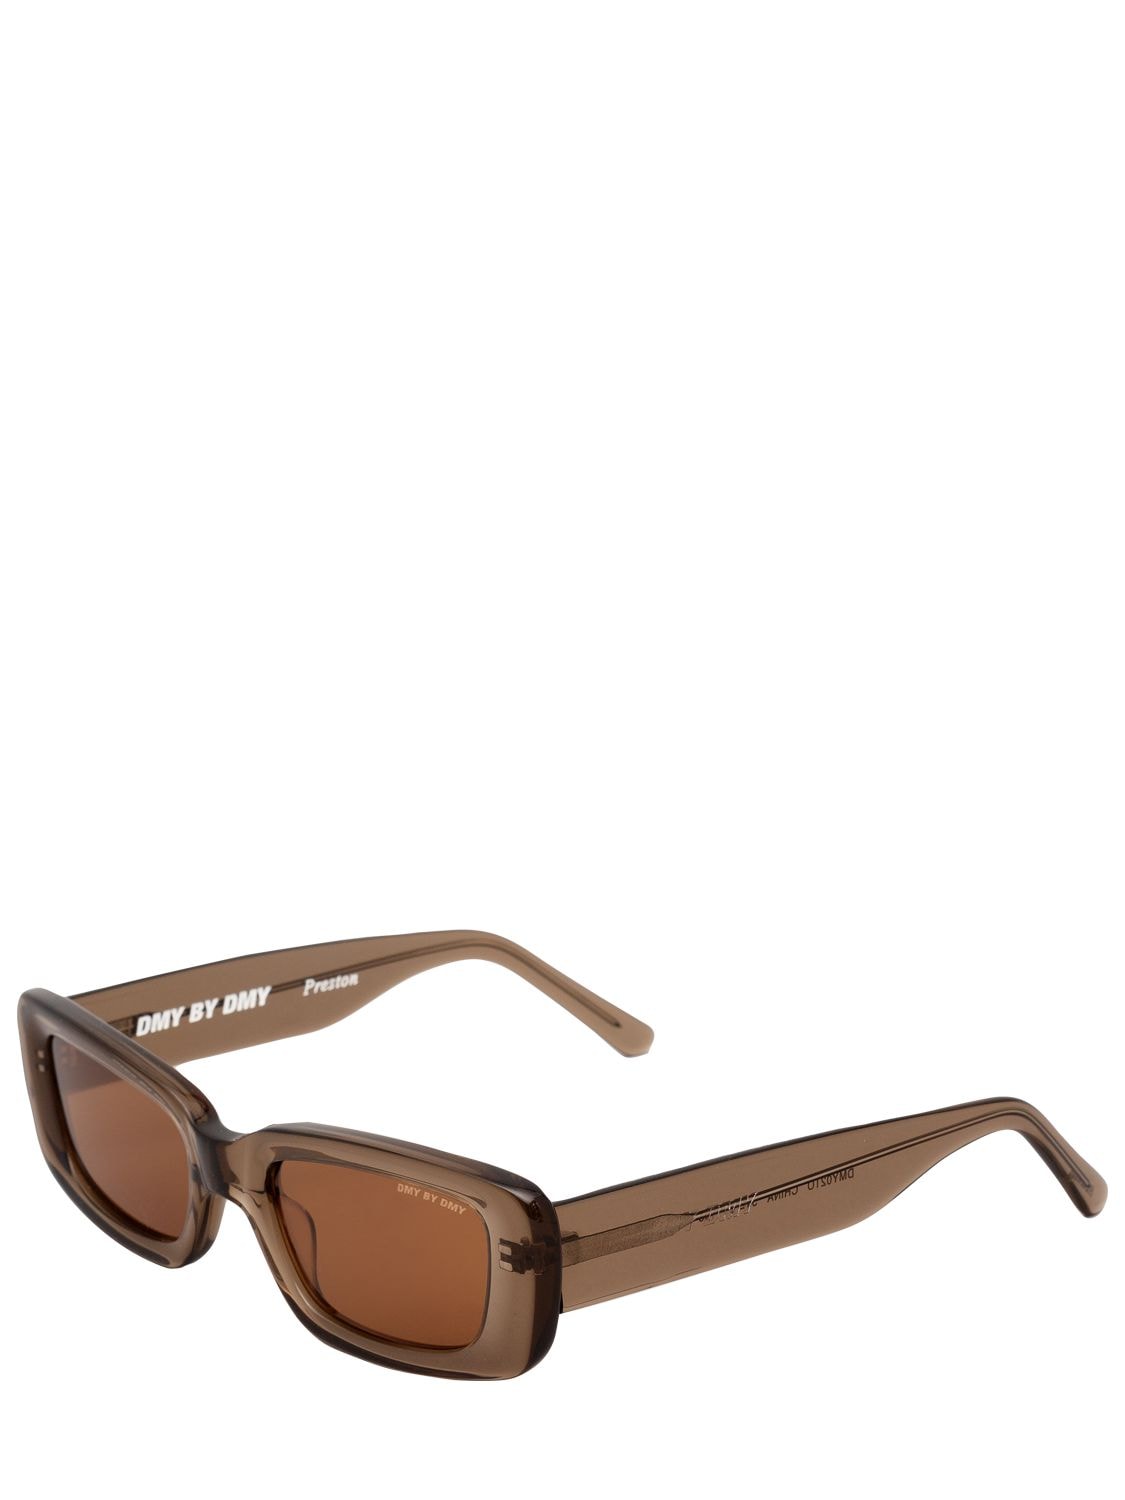 Shop Dmy By Dmy Preston Squared Acetate Sunglasses In Olive,brown